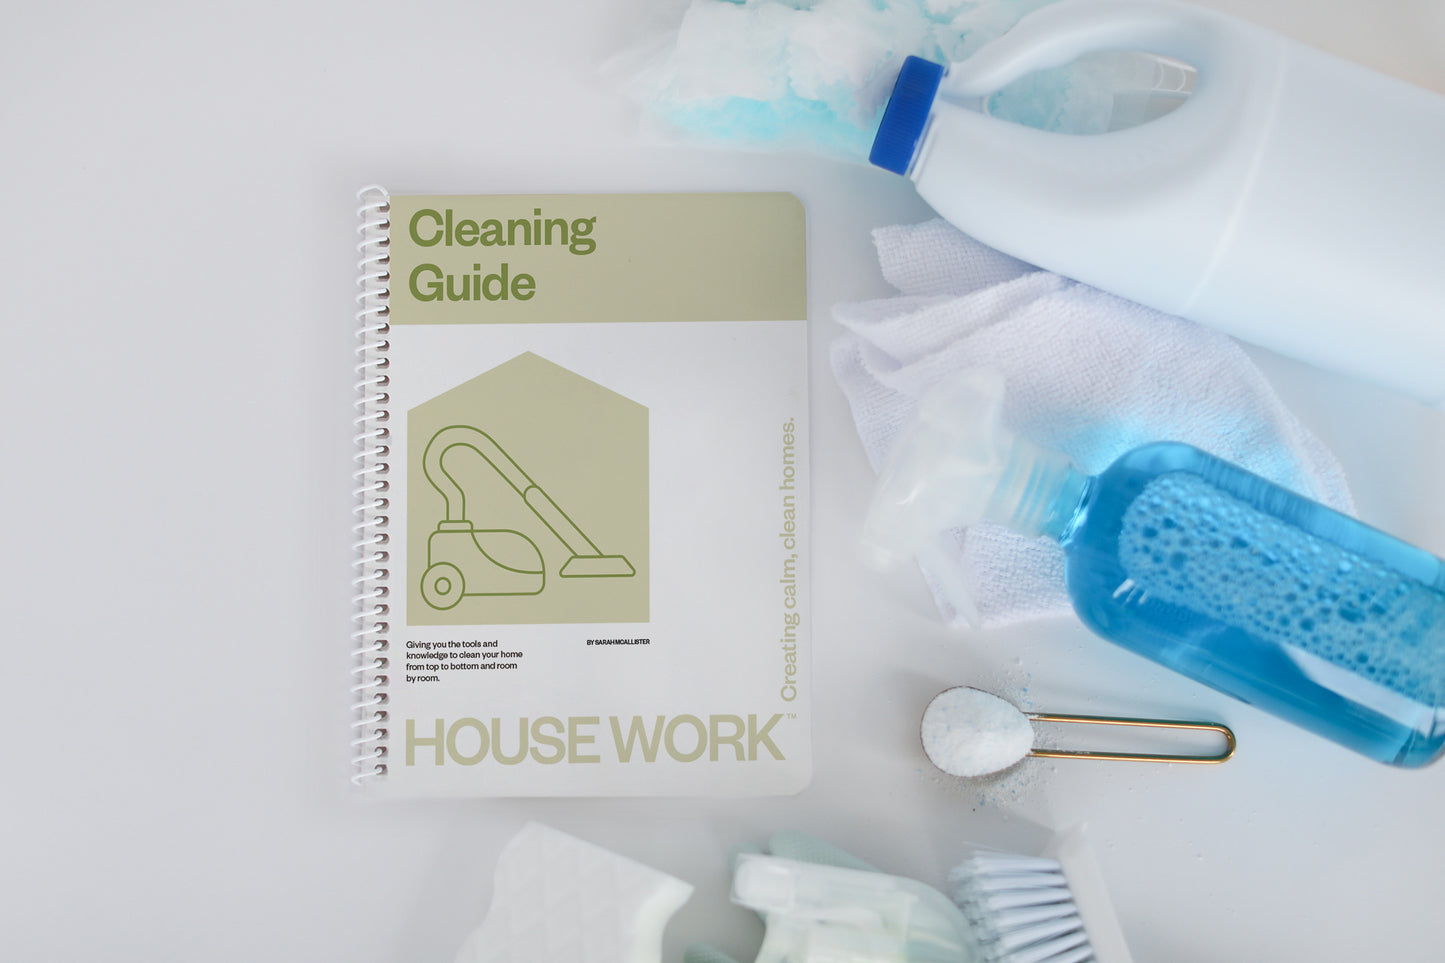 Cleaning Guide (Hard Copy)